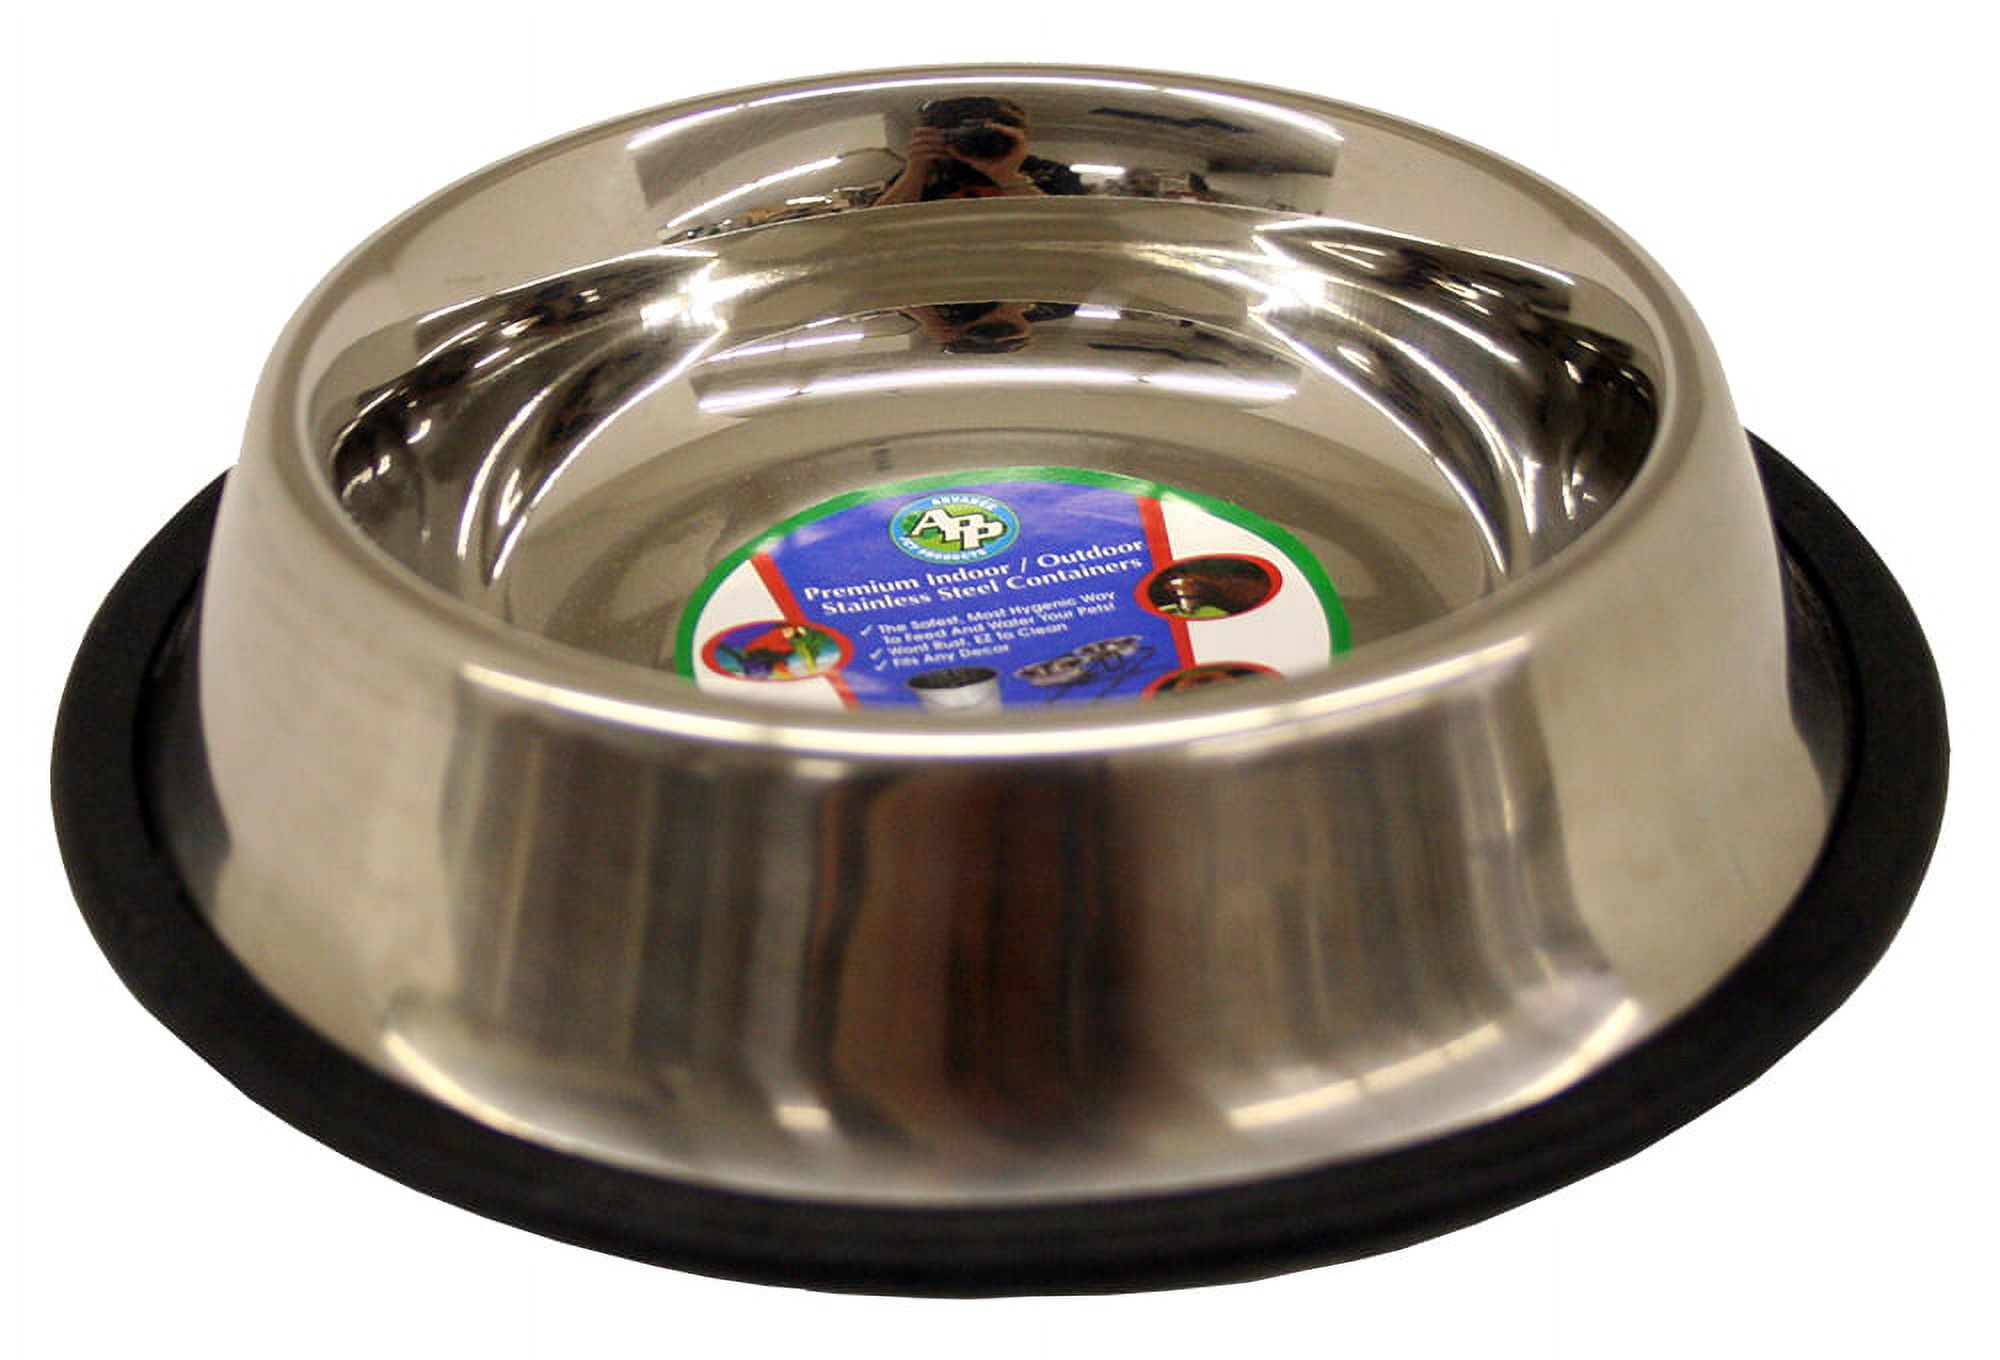 Indipets Stainless Steel No-Tip Dog Bowl 16 OZ - image 1 of 2